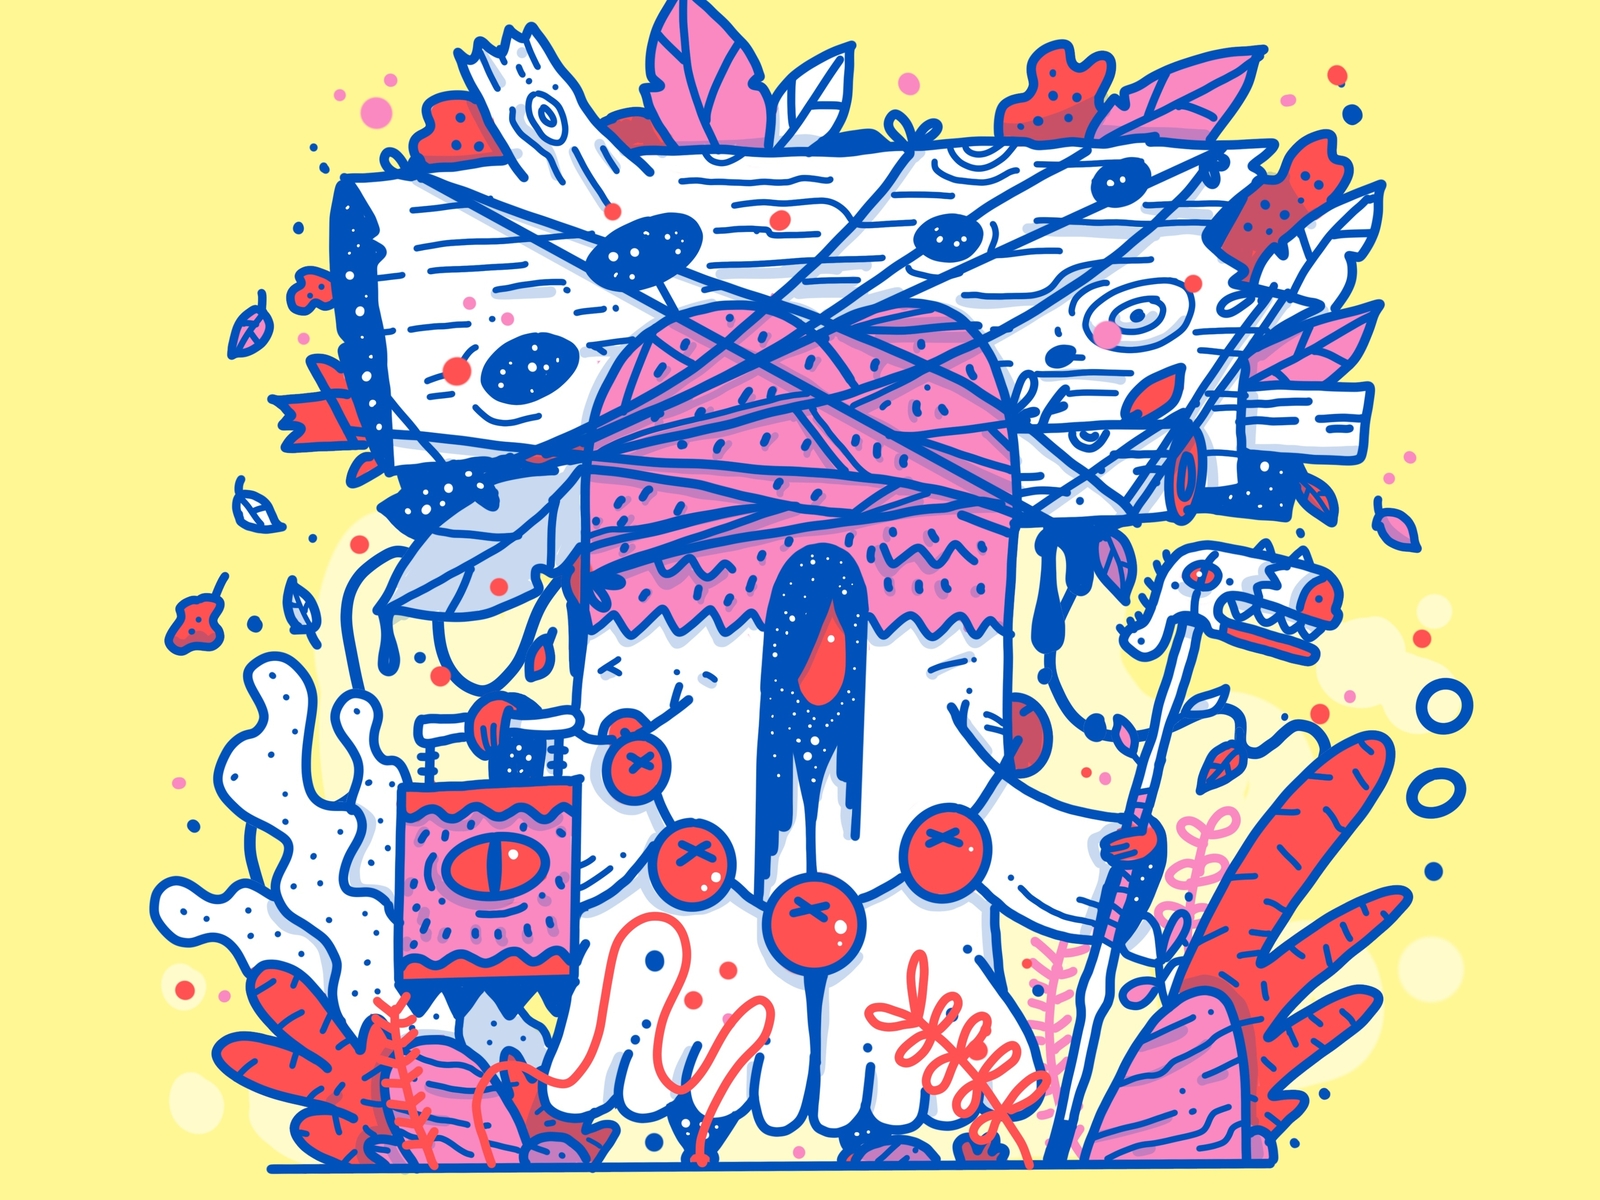 The witch by Bartosz Dronka on Dribbble